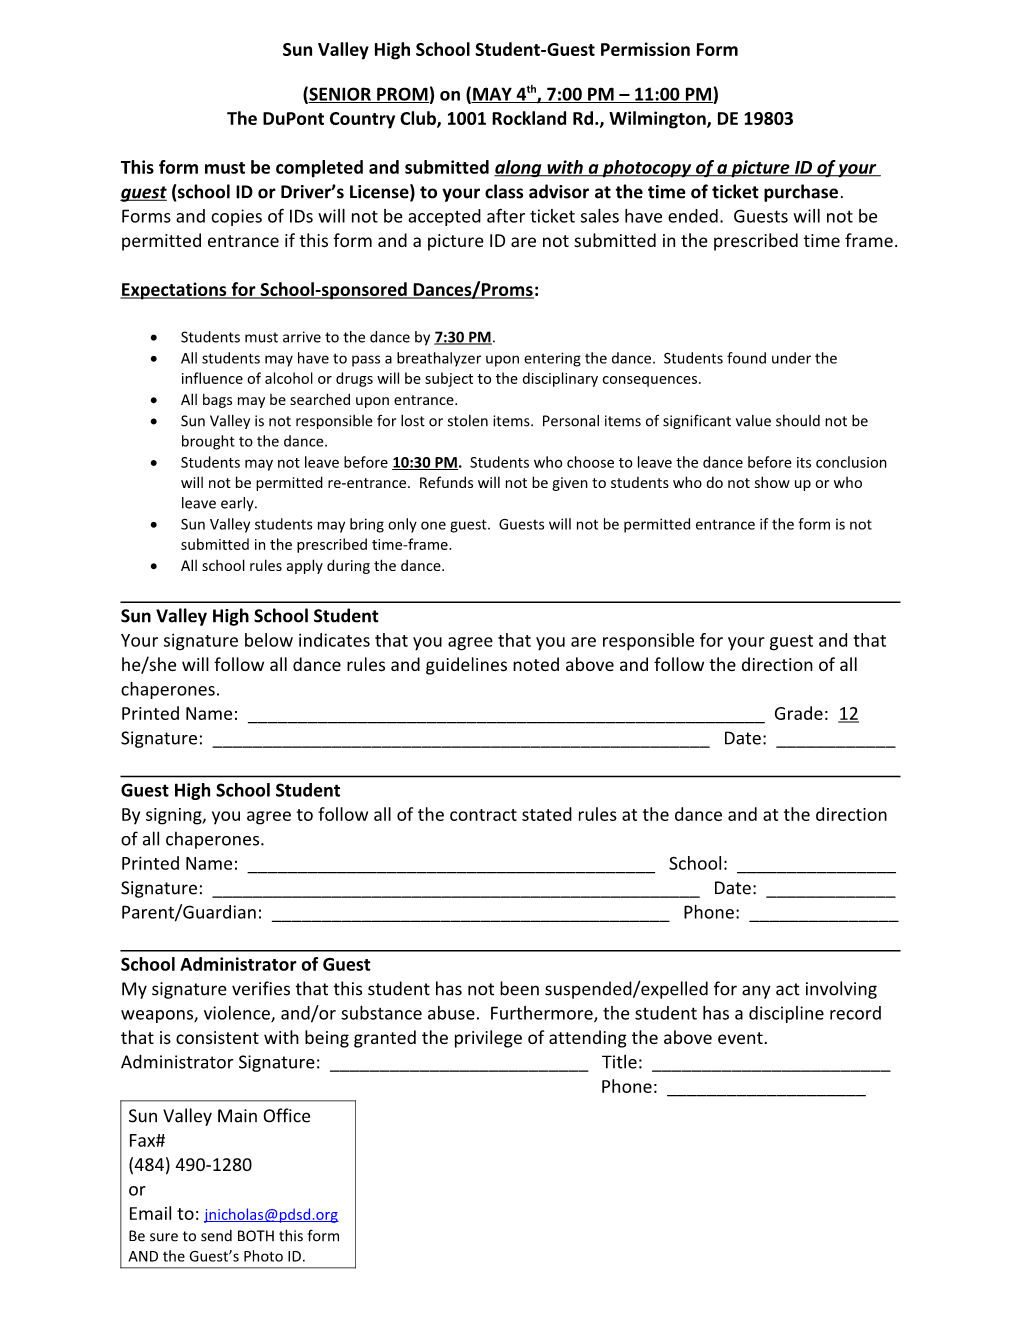 Sun Valley High School Student-Guest Permission Form